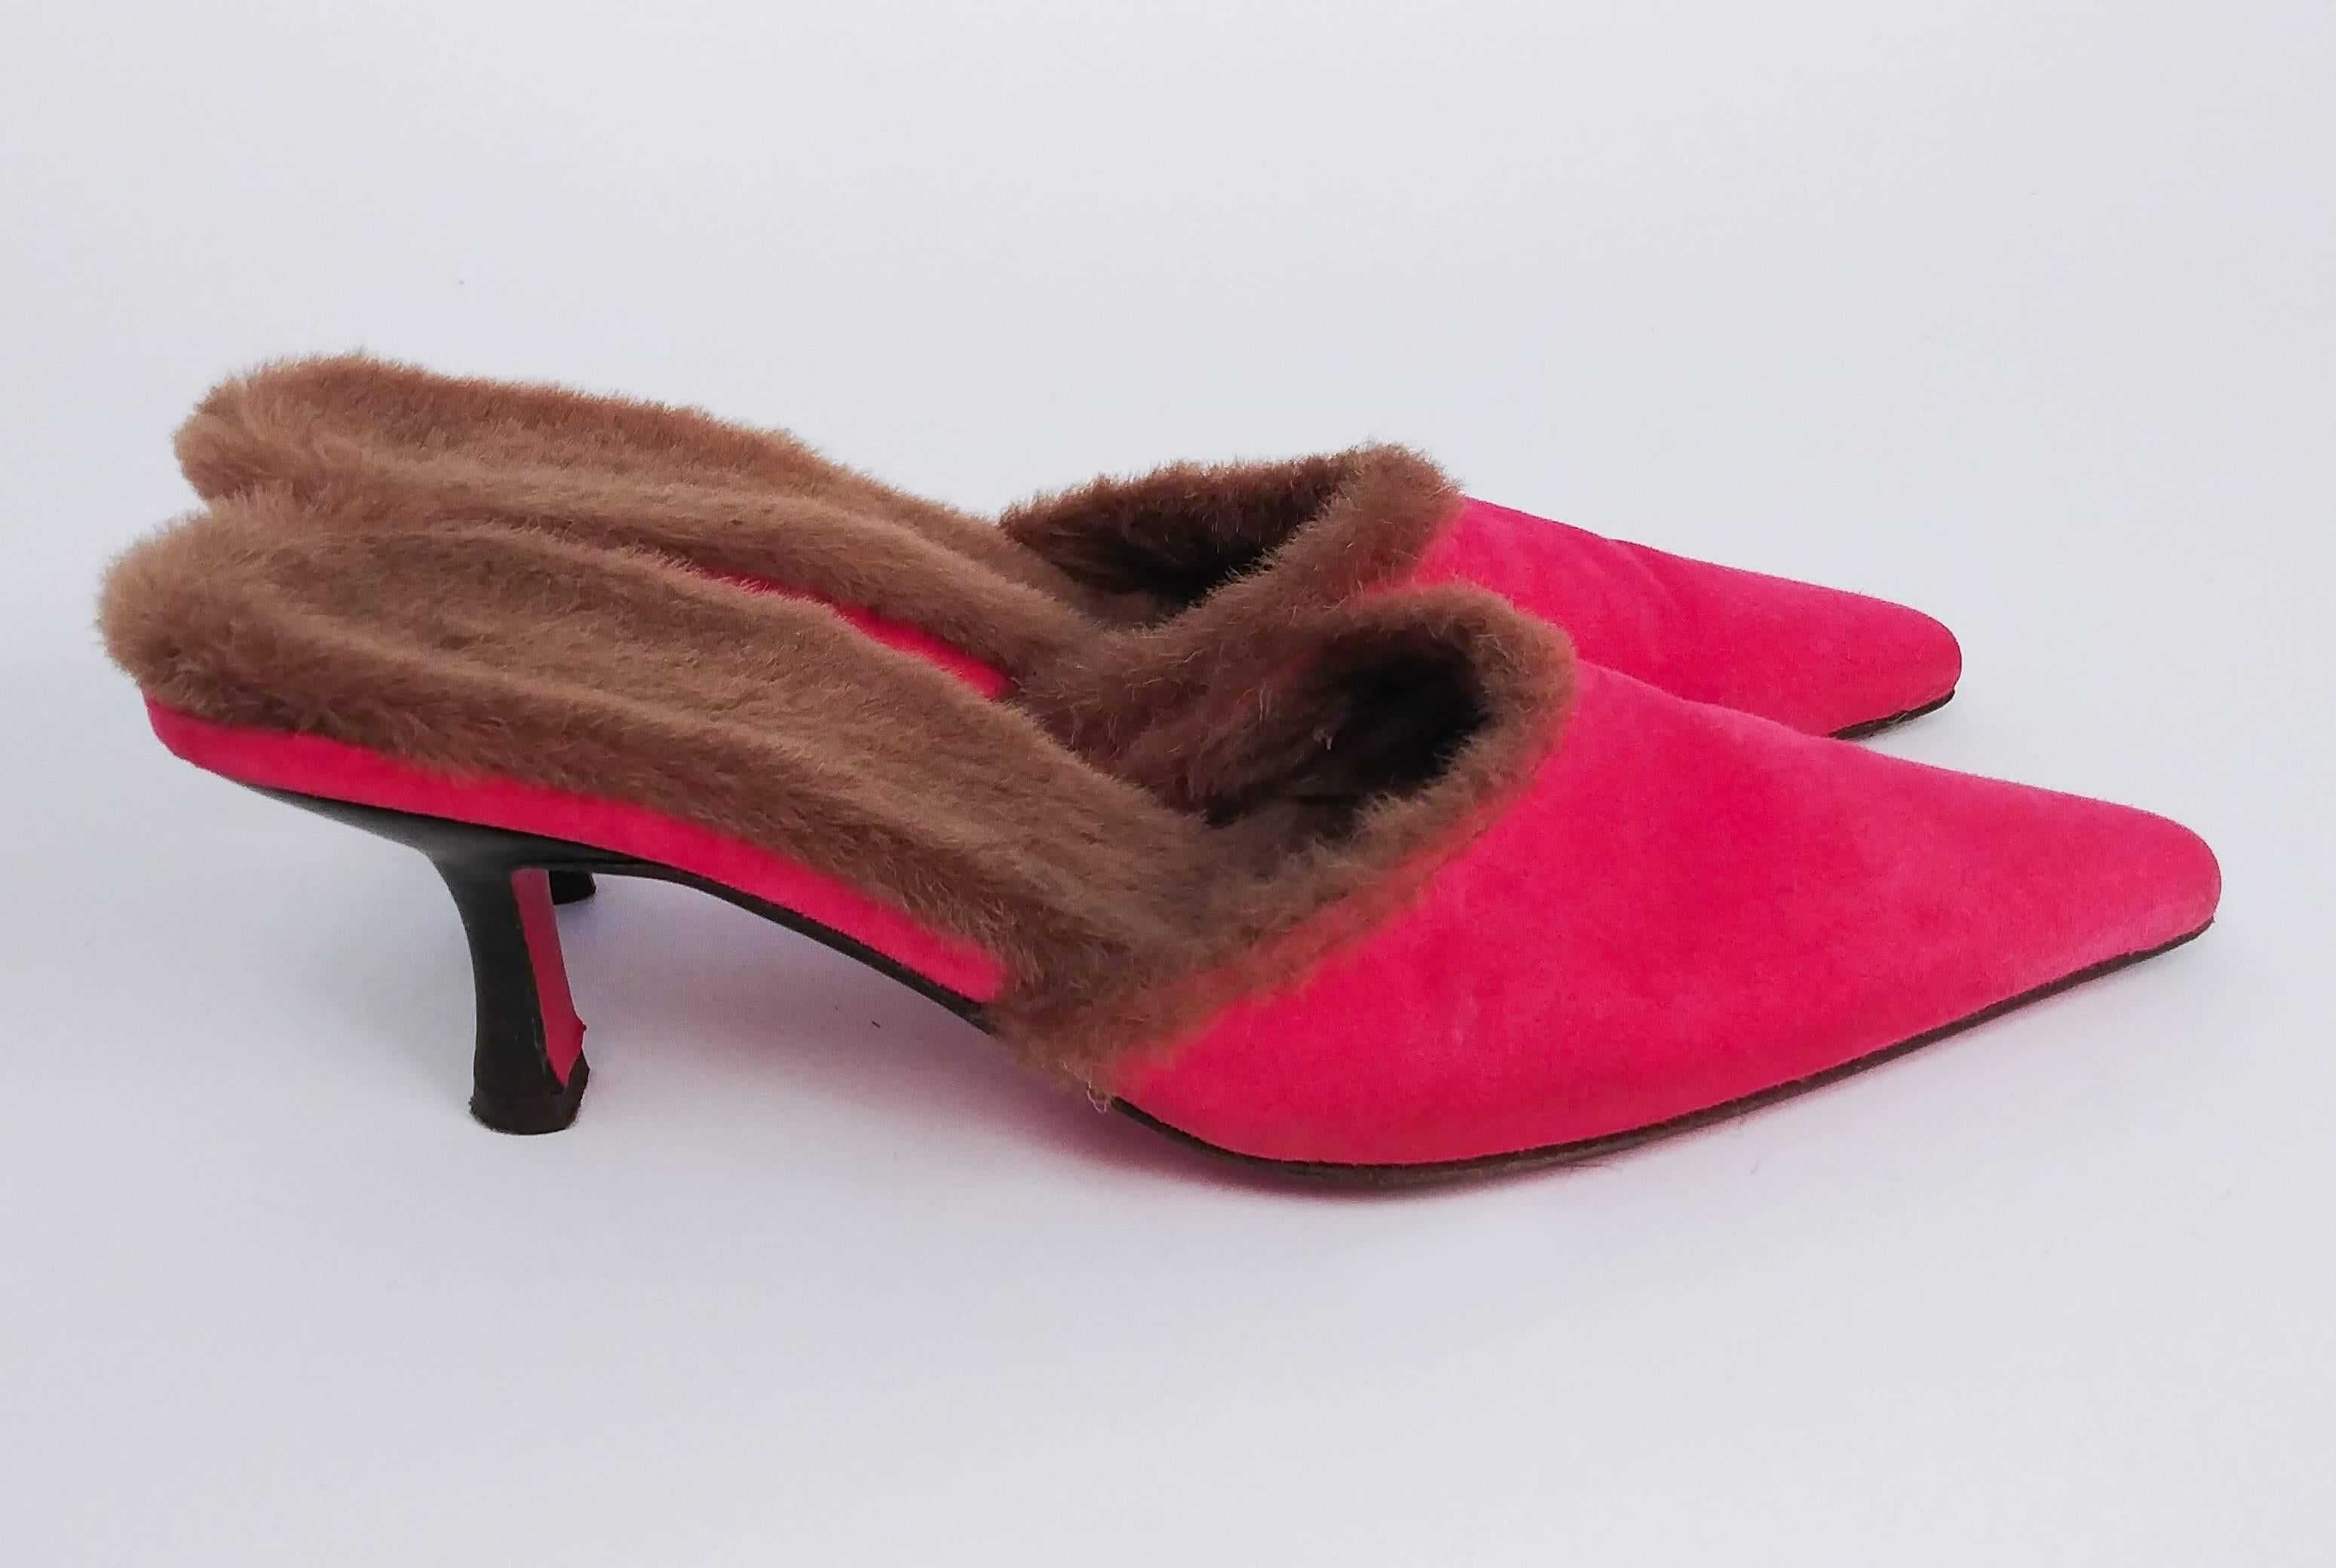 1980s Ungaro Hot Pink Suede Mules w/ Faux Fur Lining. Trumpet shaped kitten heel. Lined in brown faux fur. Pointed toes. Slight wear in soles. Marked size 7.